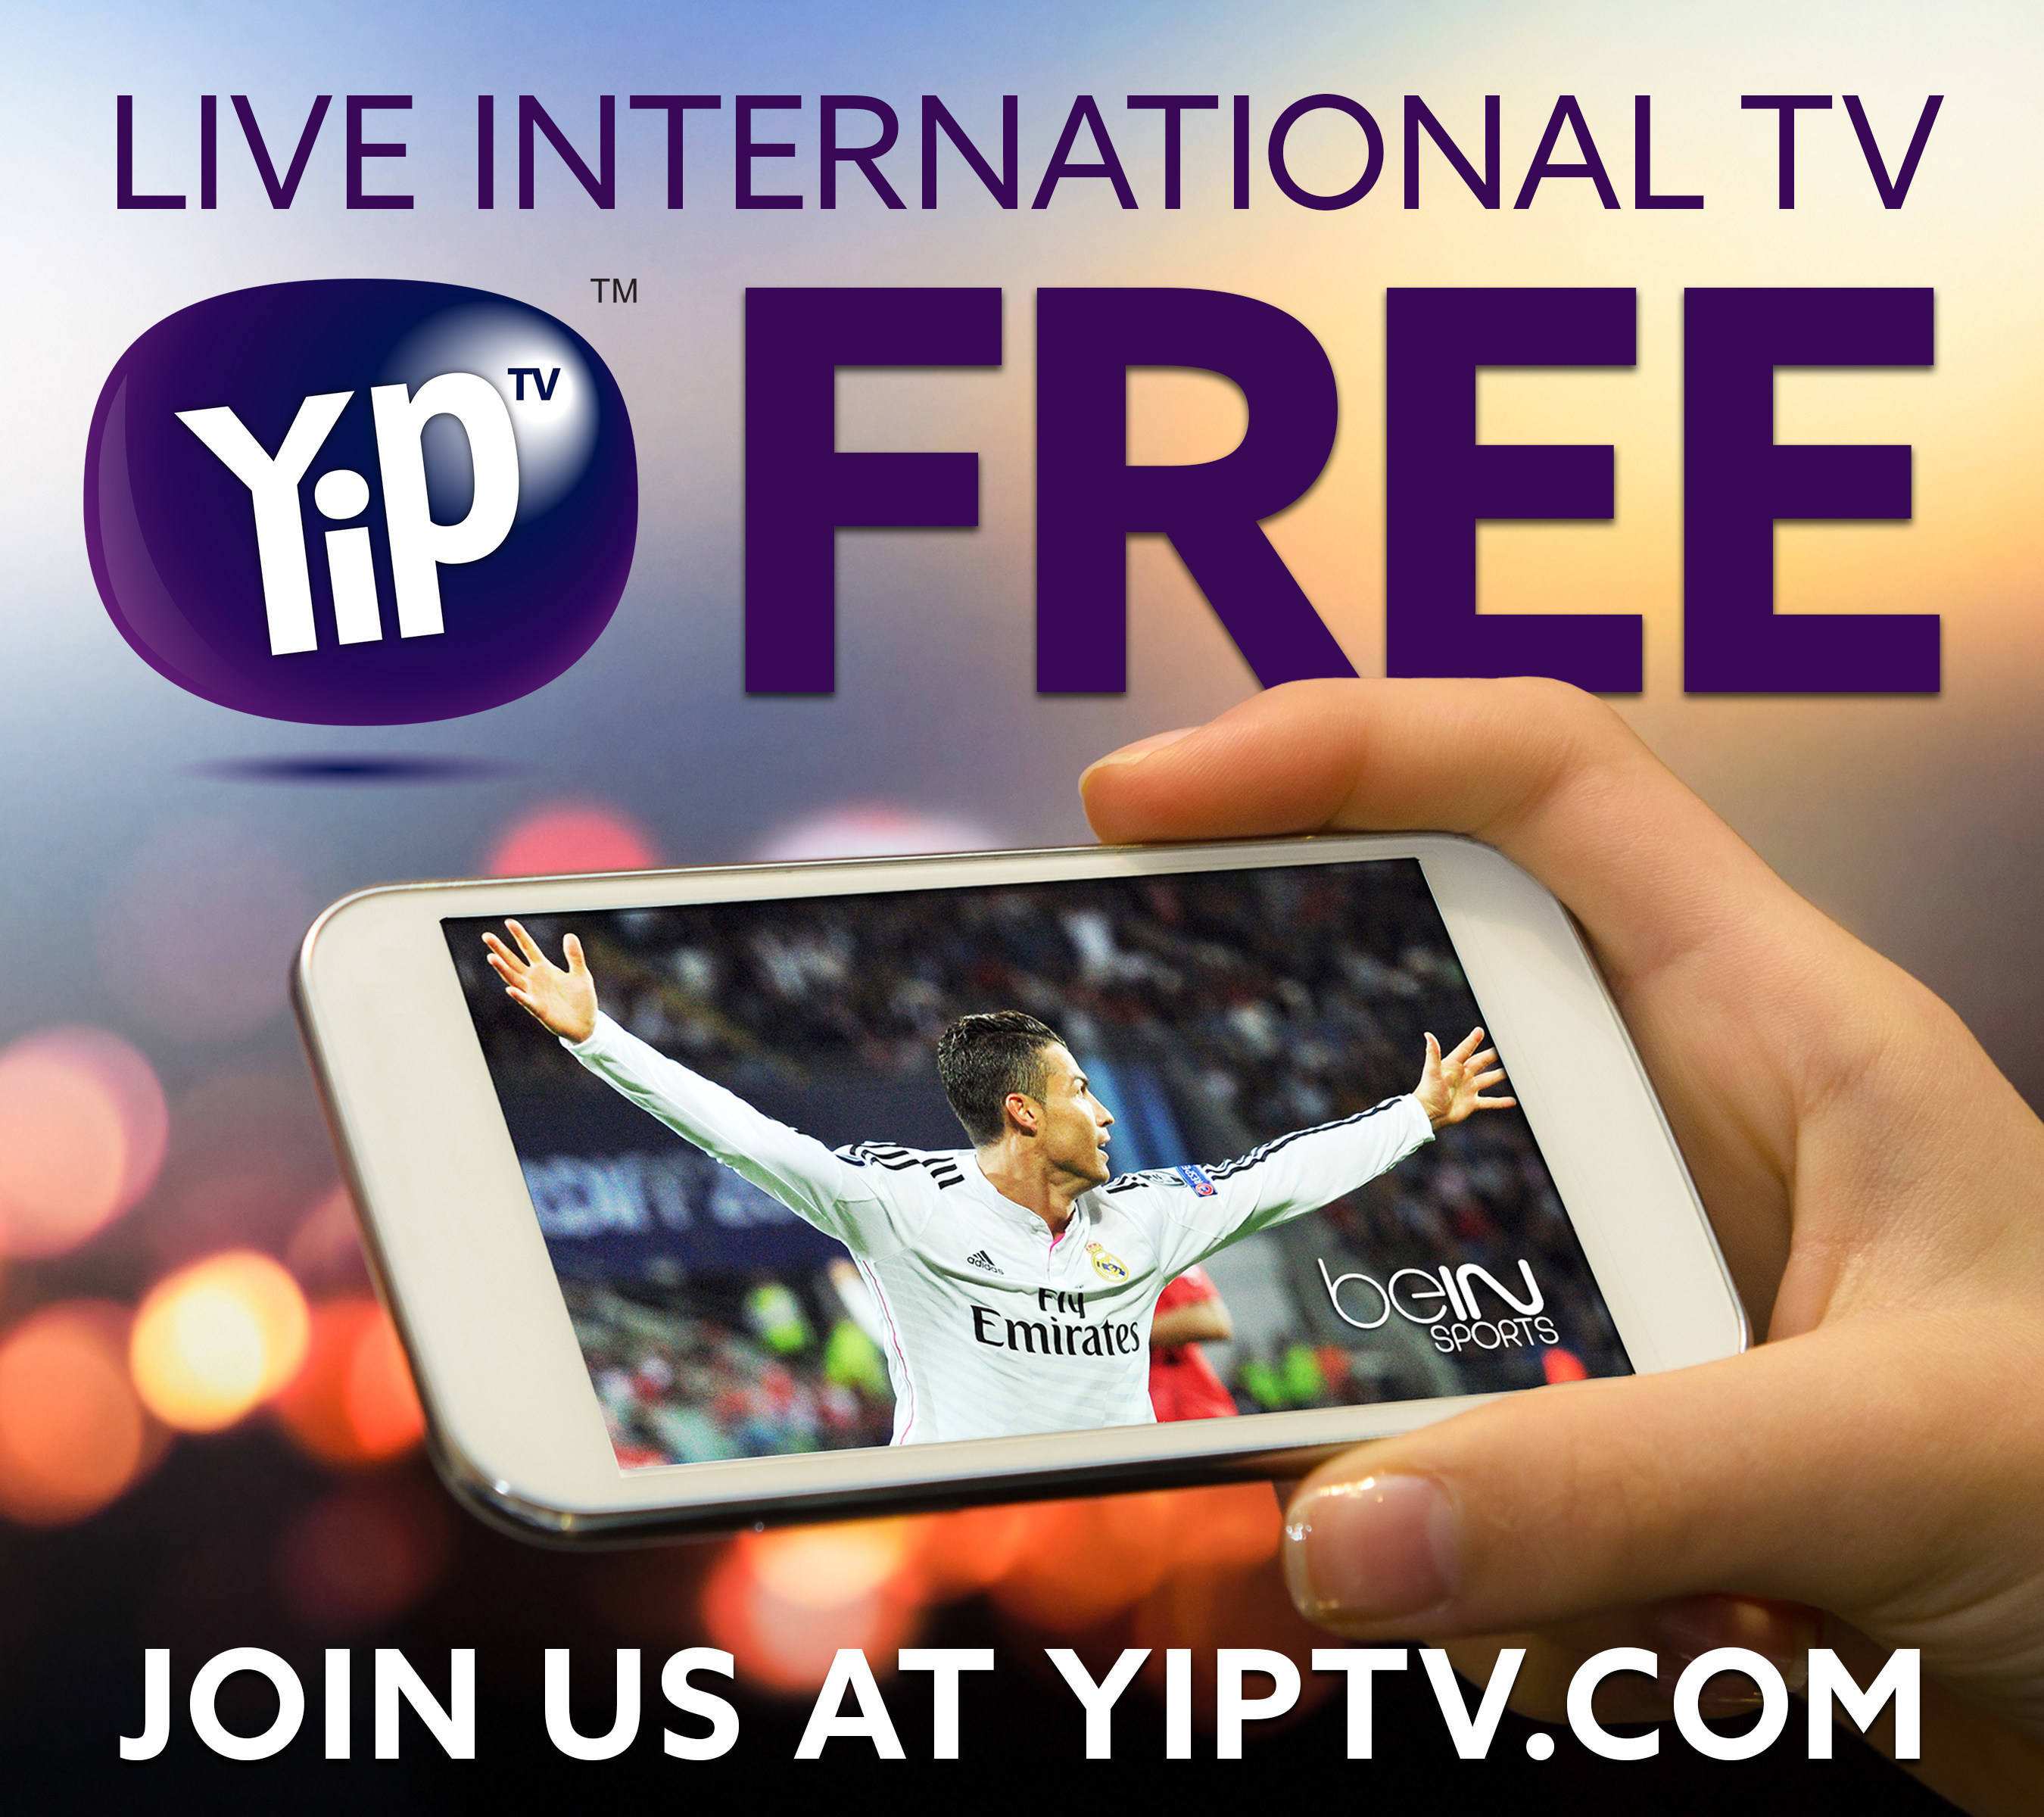 Broadband OTT Service YipTV Achieves Significant Milestone as Content Lineup for Subscribers Surpasses 100 Live Channels